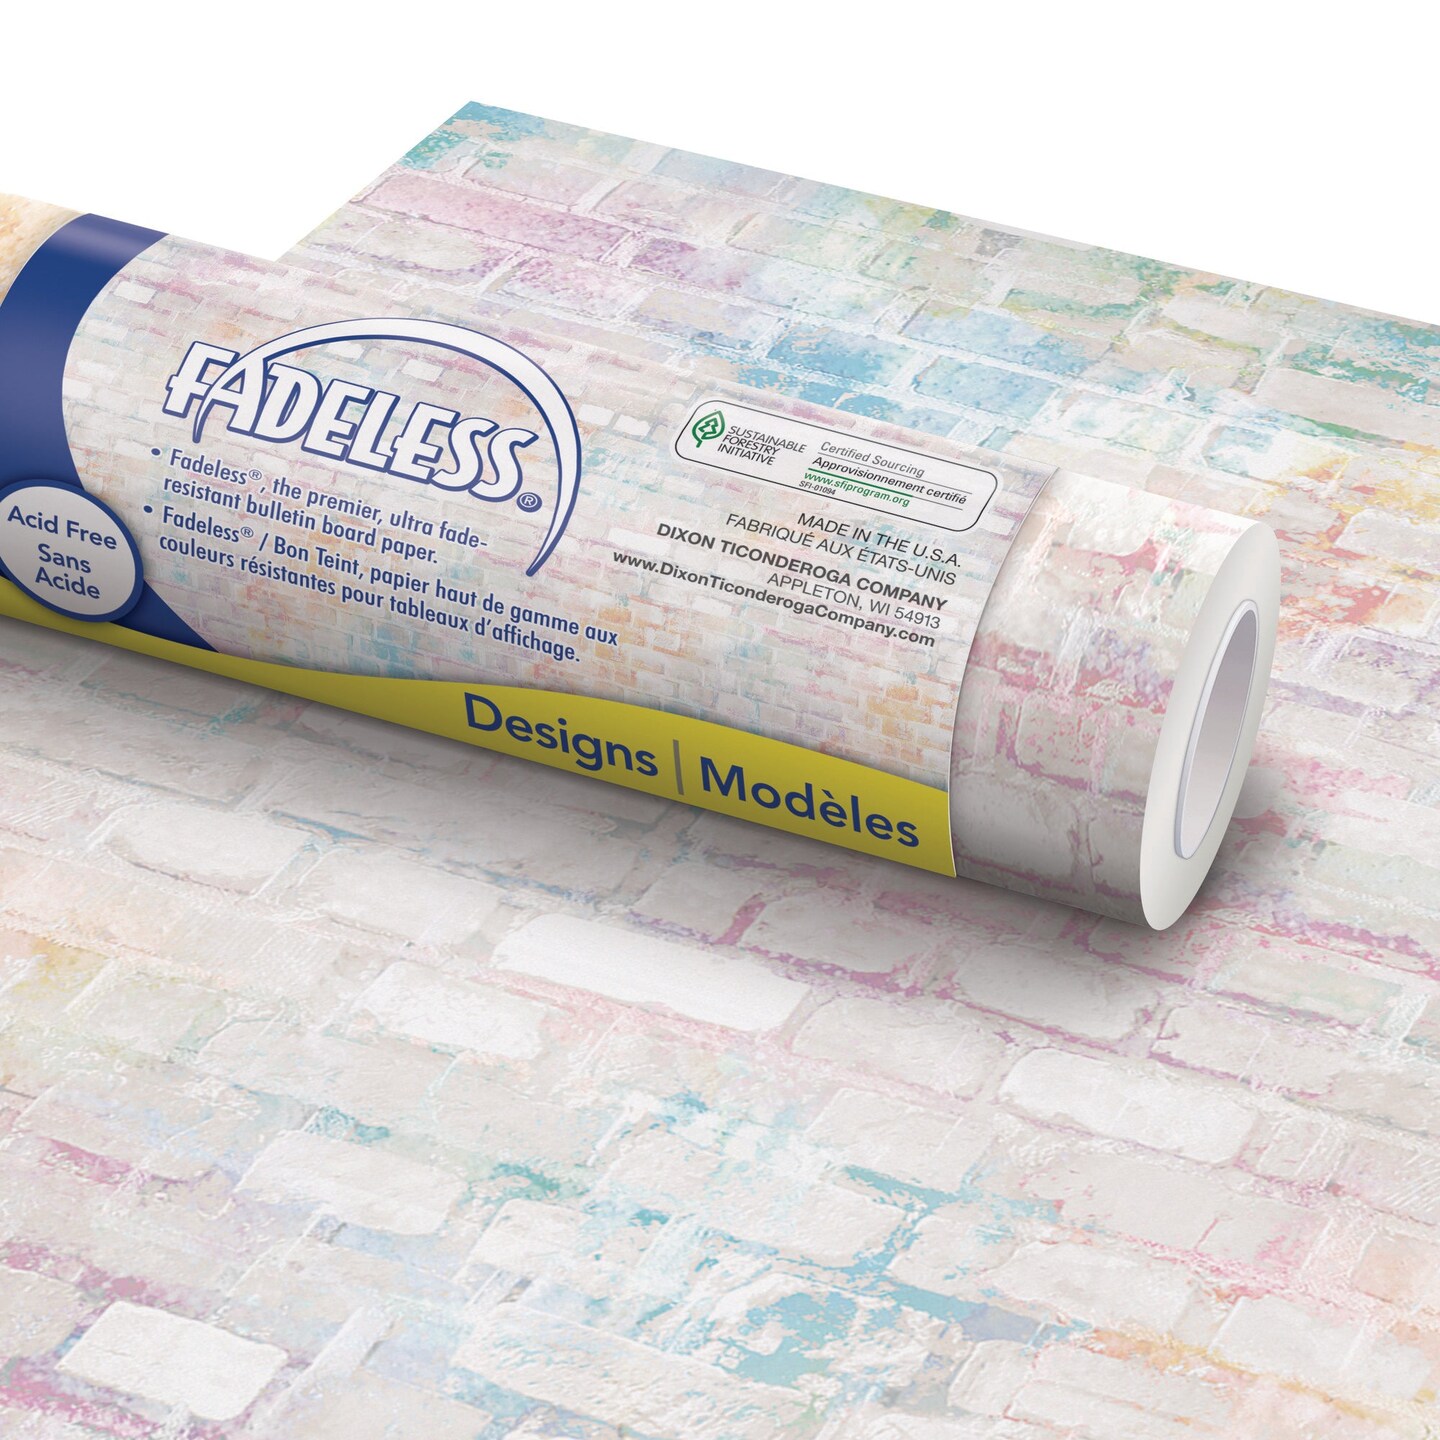  Fadeless Bulletin Board Paper, Fade-Resistant Paper for  Classroom Decor, 48” x 50', Azure, 1 Roll : Prints : Arts, Crafts & Sewing